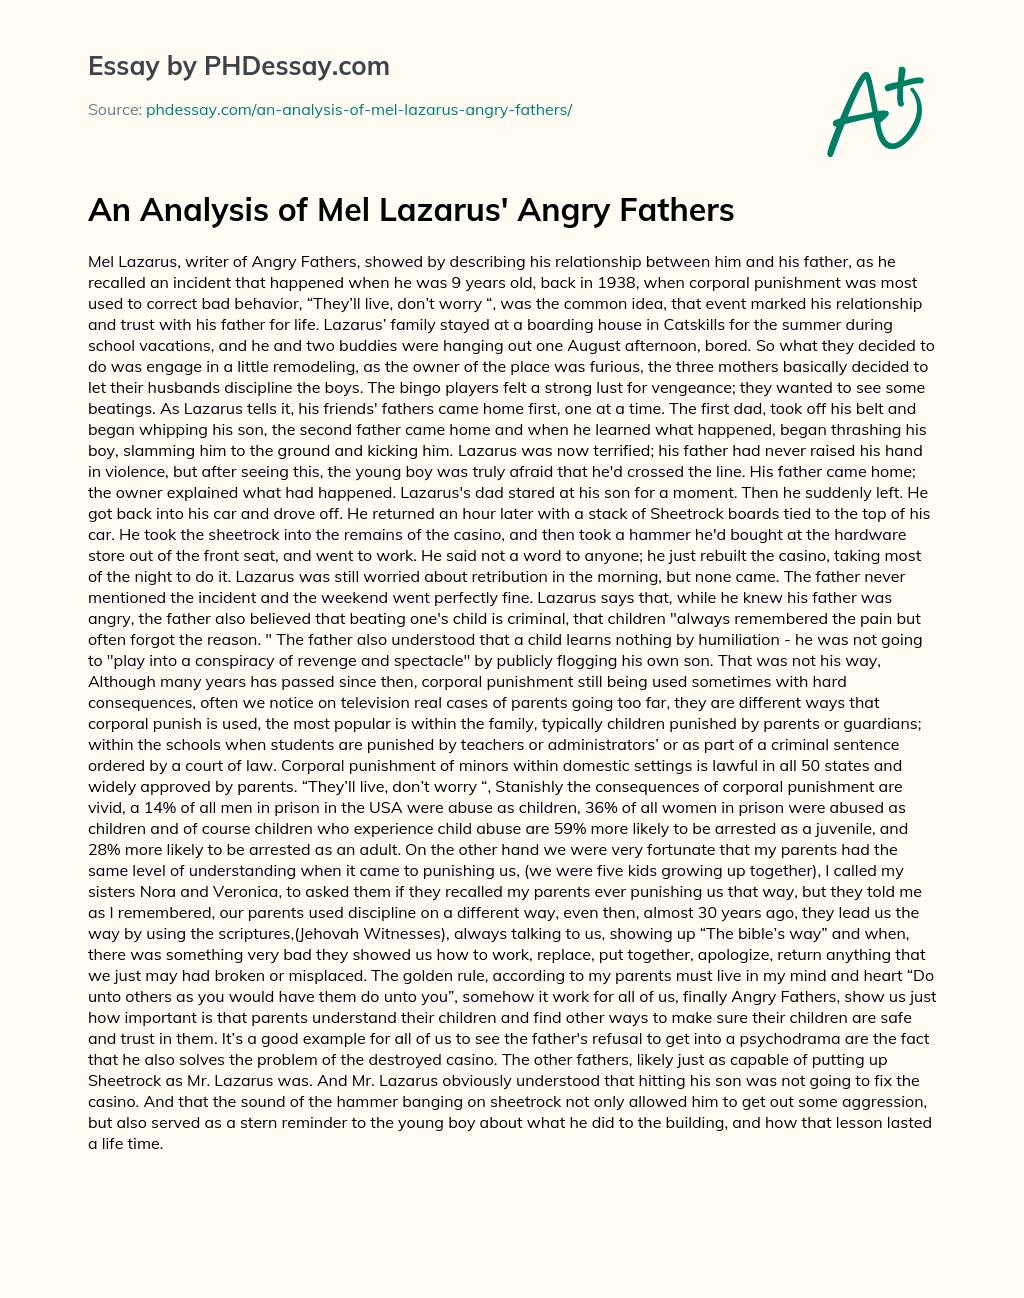 An Analysis of Mel Lazarus’ Angry Fathers essay